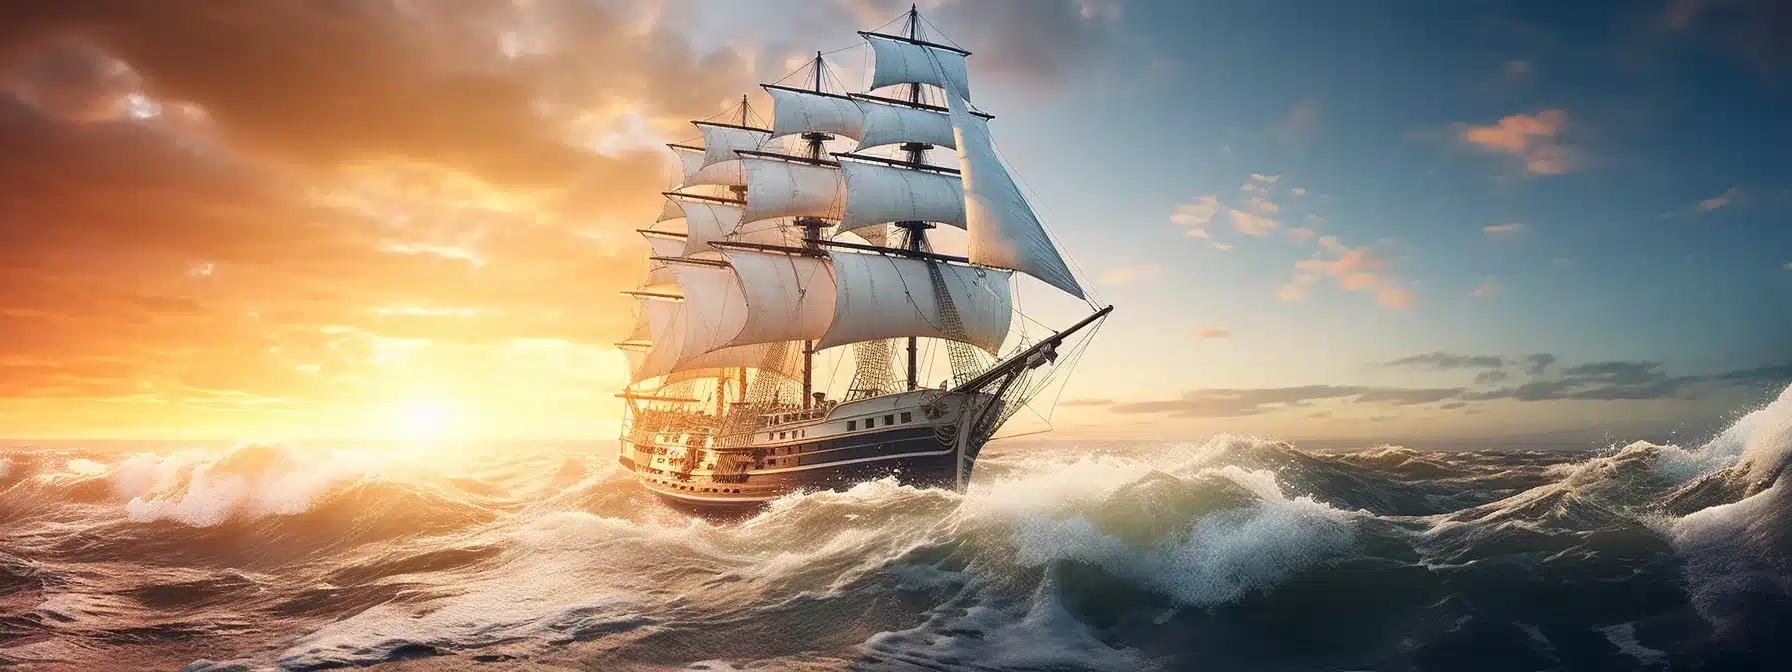 A Ship Sailing Smoothly Across A Digital Marketing Sea, Overcoming Waves Of Competition On Its Journey Towards Brand Awareness.